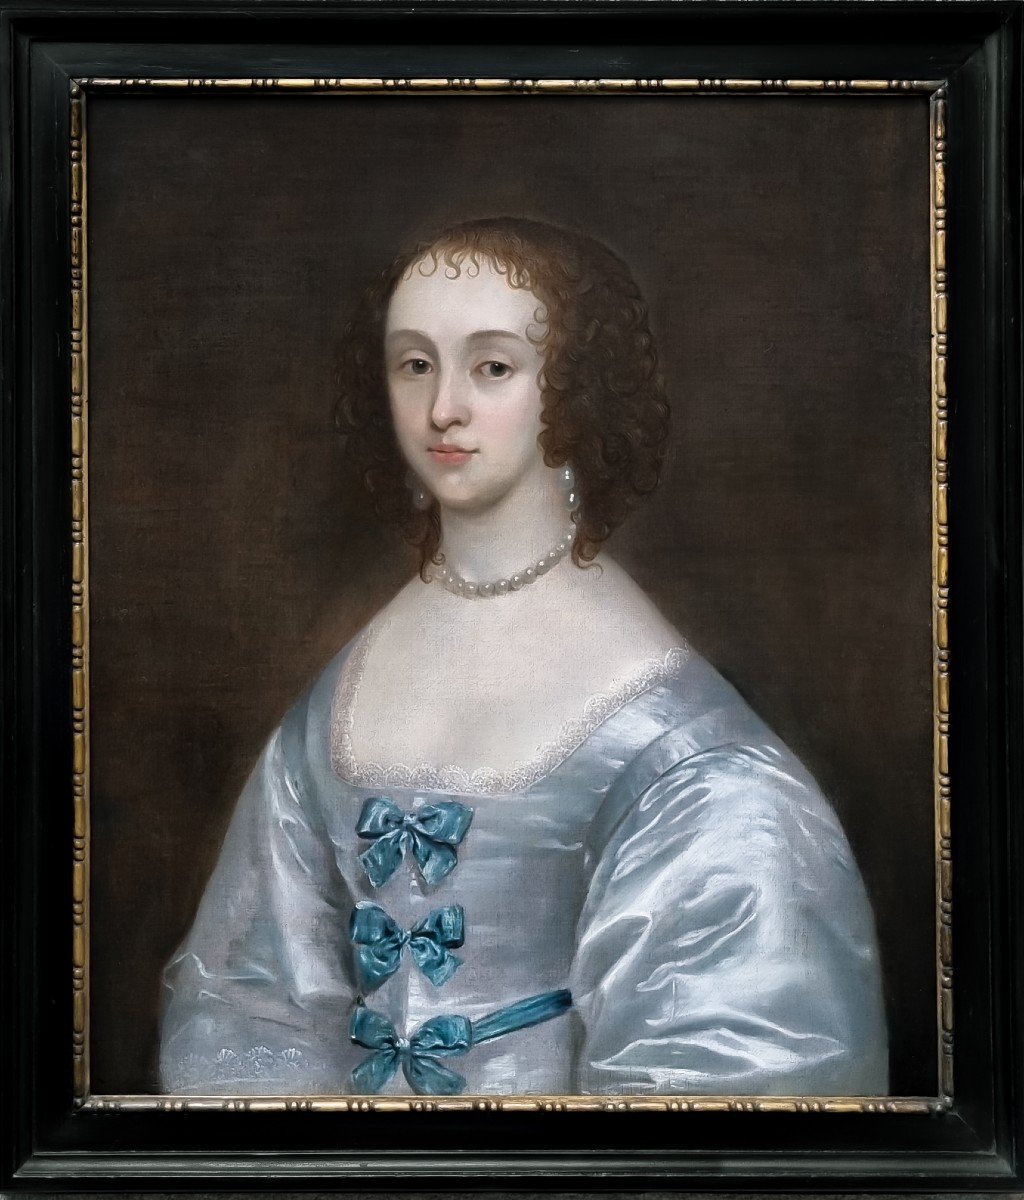 Portrait Of A Lady, Katherine St Aubyn Godolphin C.1637, Antique Painting Oil On Canvas